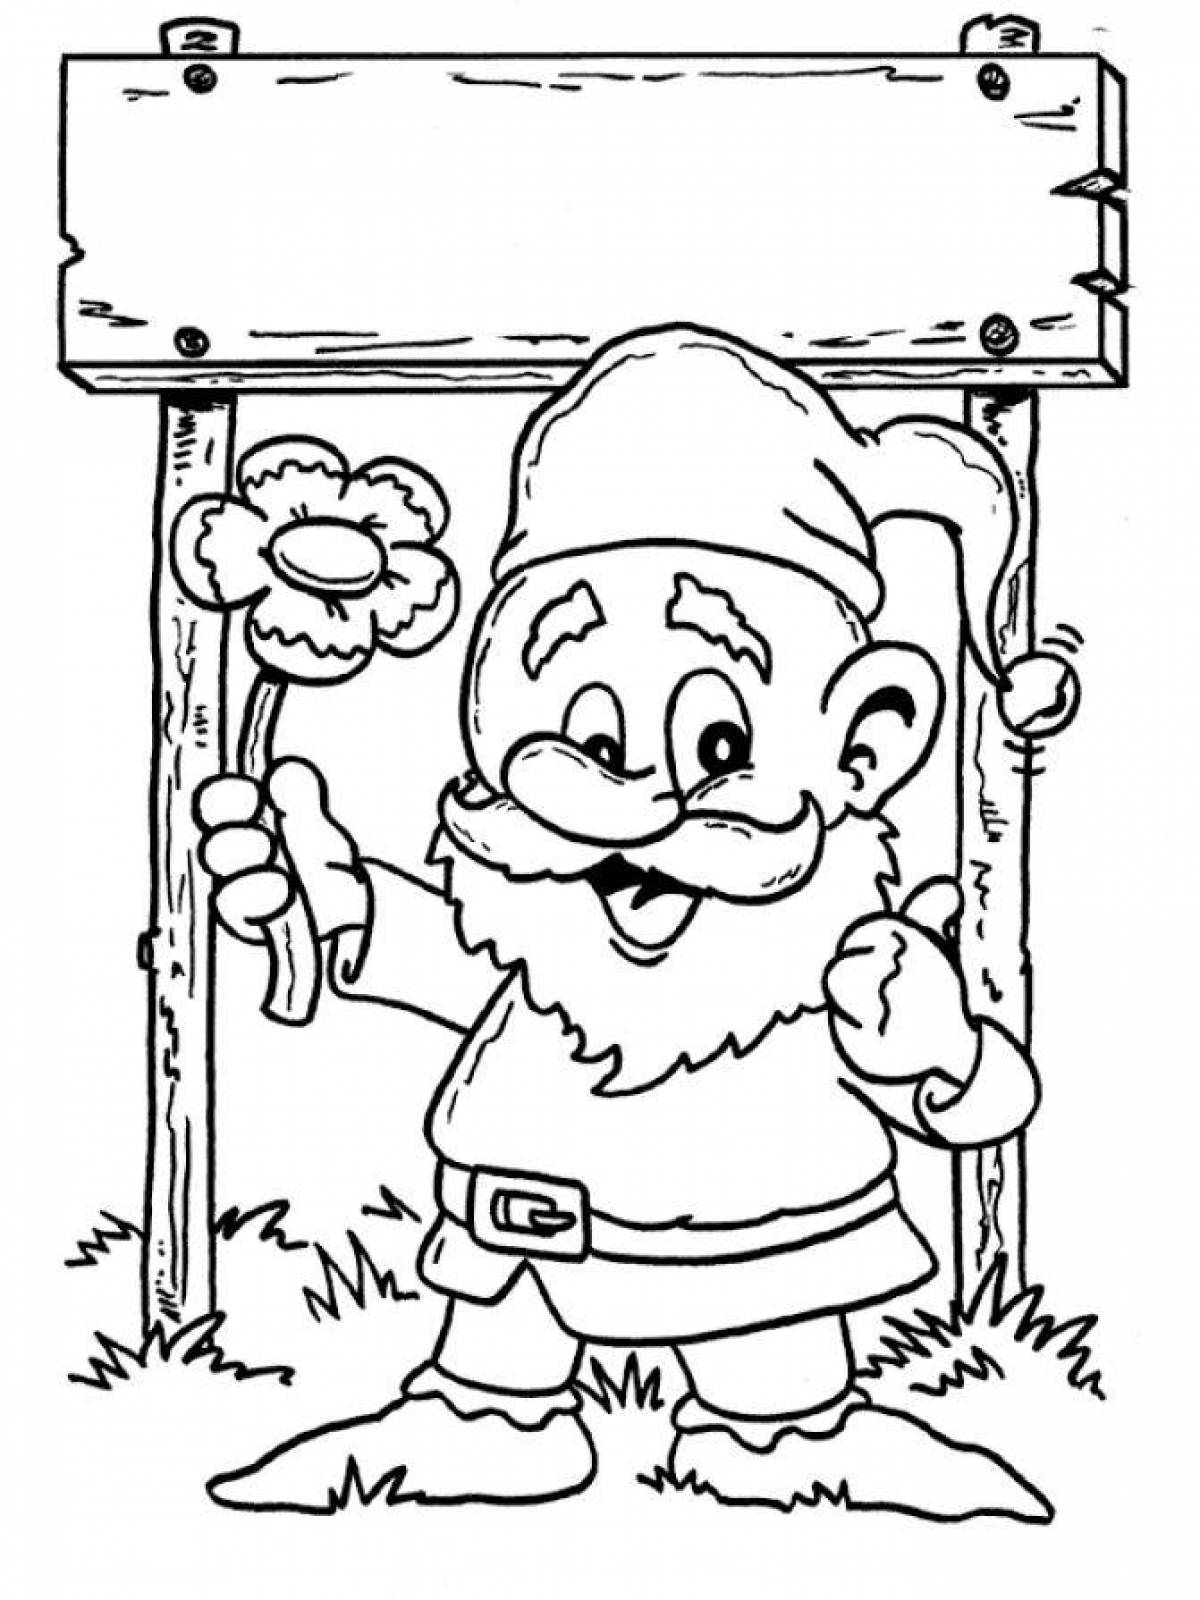 Amazing gnome coloring pages